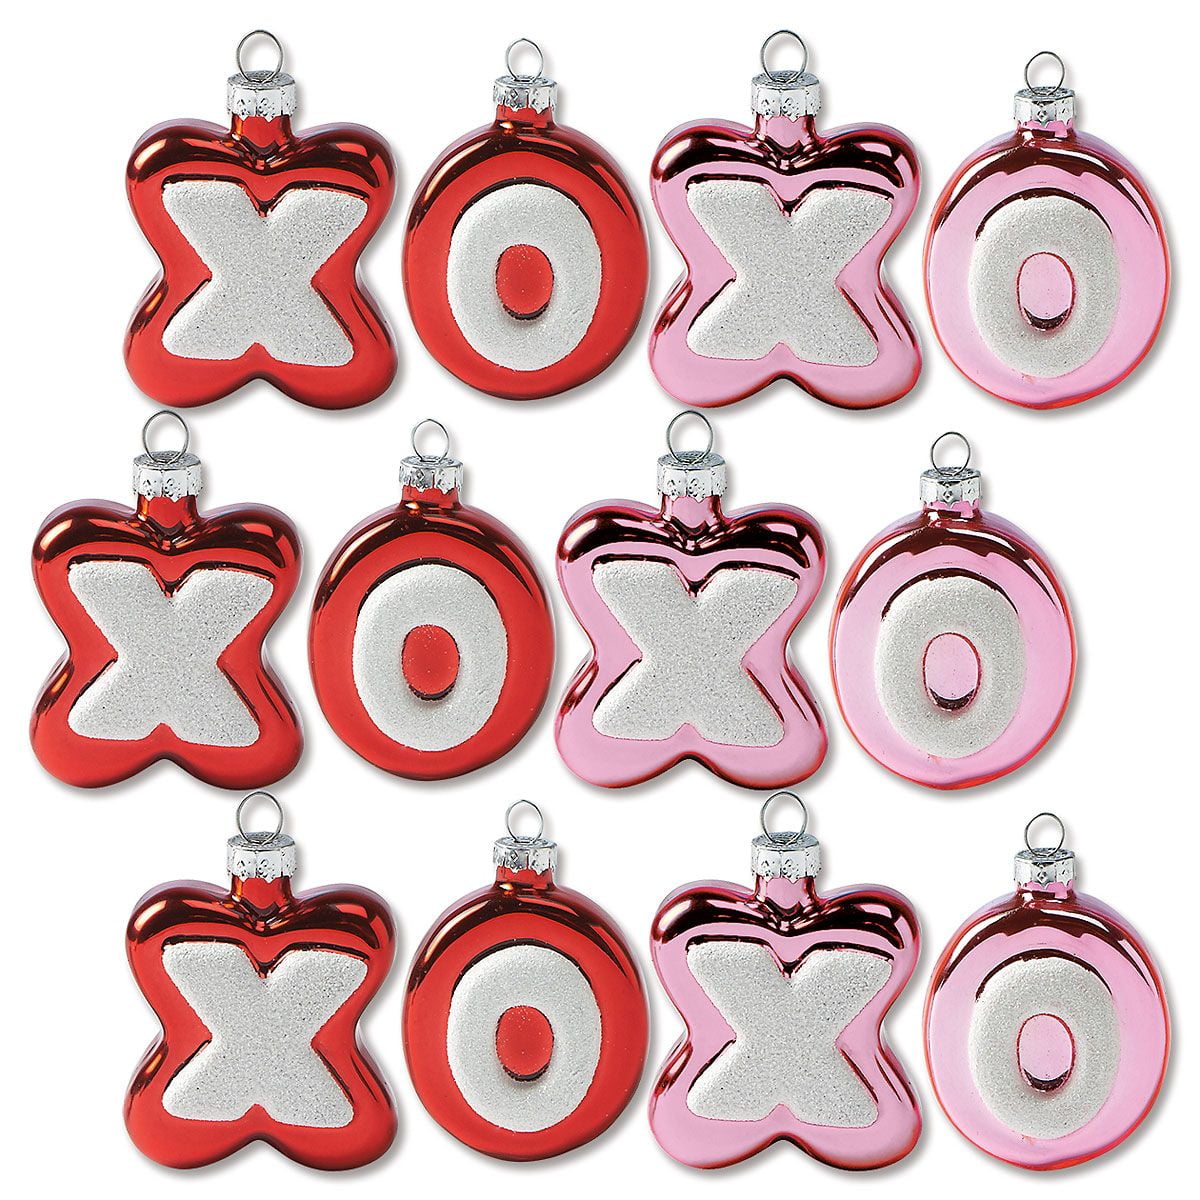 Holiday Ornament Candy Heart Ornaments Resin Love Hugs Xoxo Tf0105, Size: 2 in H x 2.25 in W x .25 in D